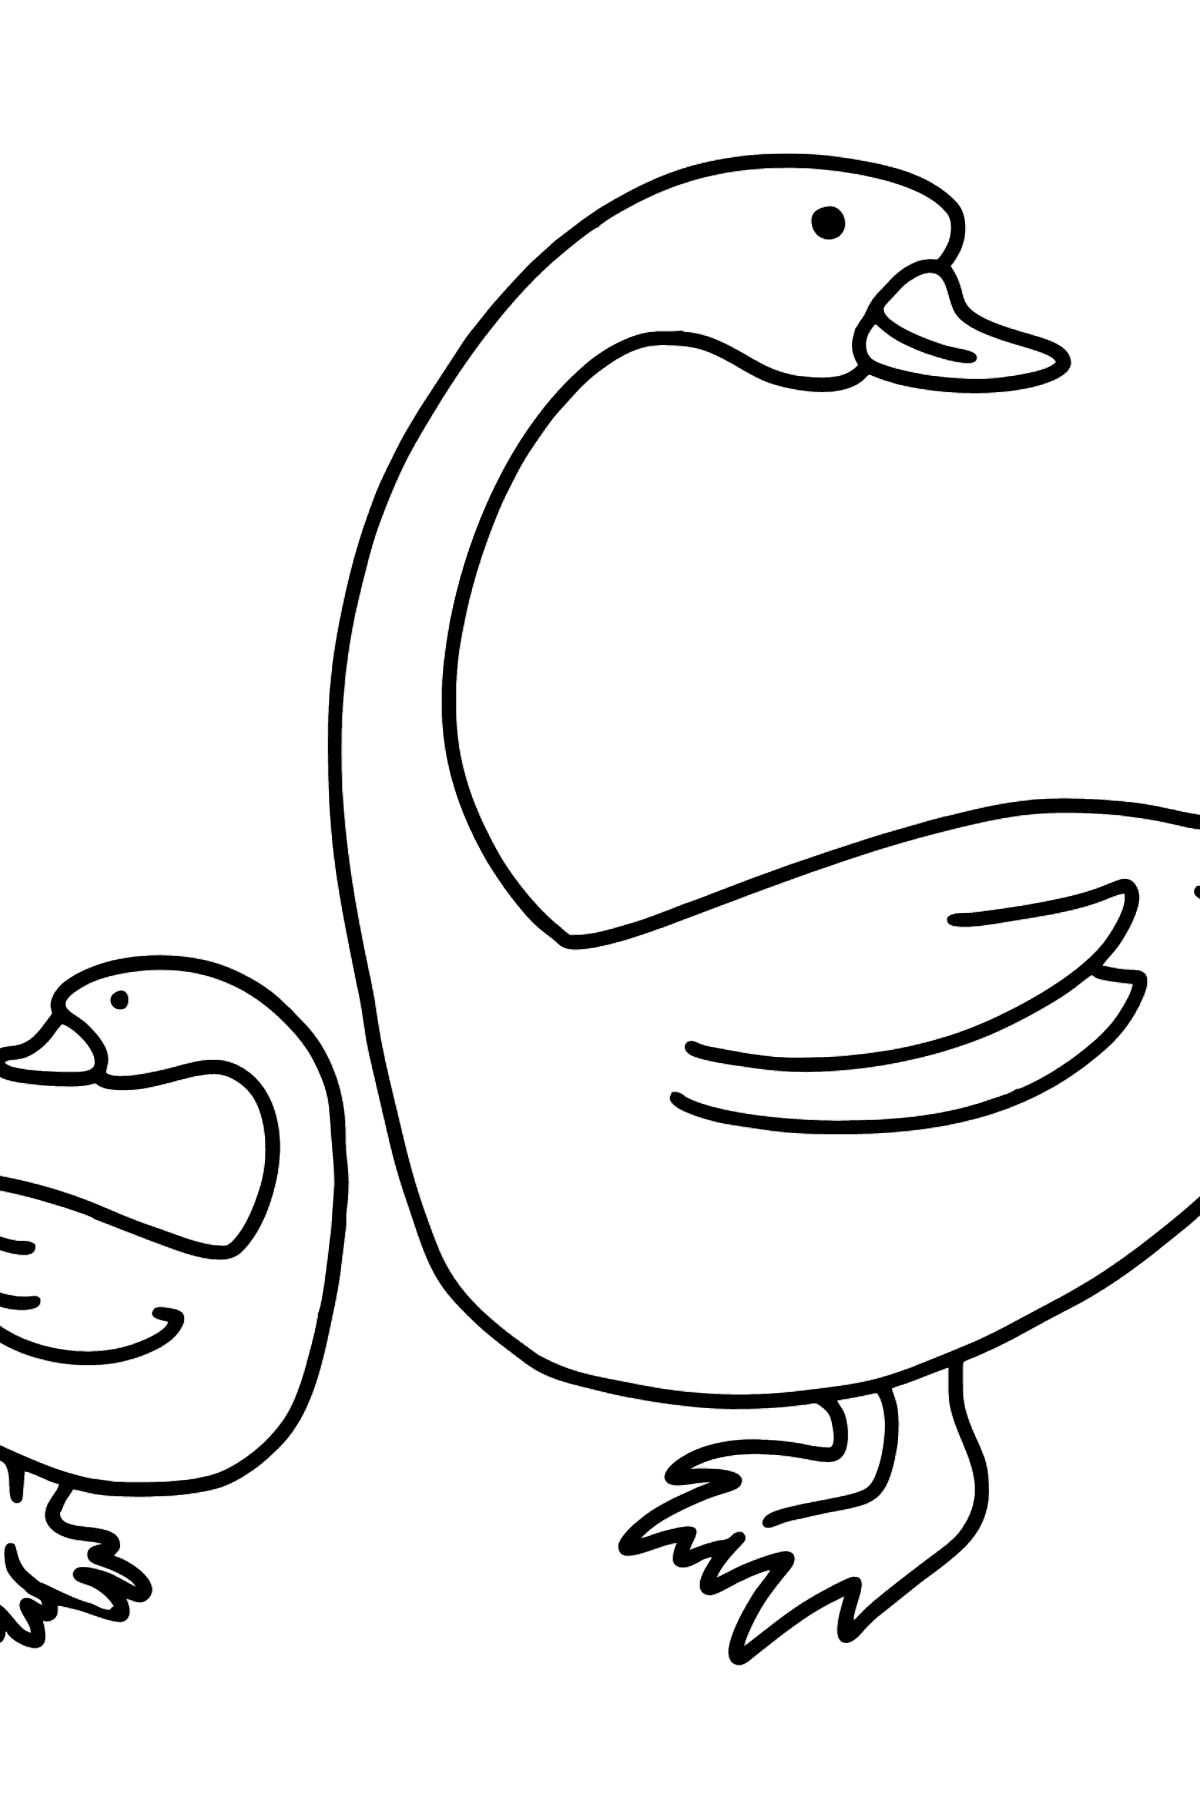 Goose with Gosling coloring page - Coloring Pages for Kids